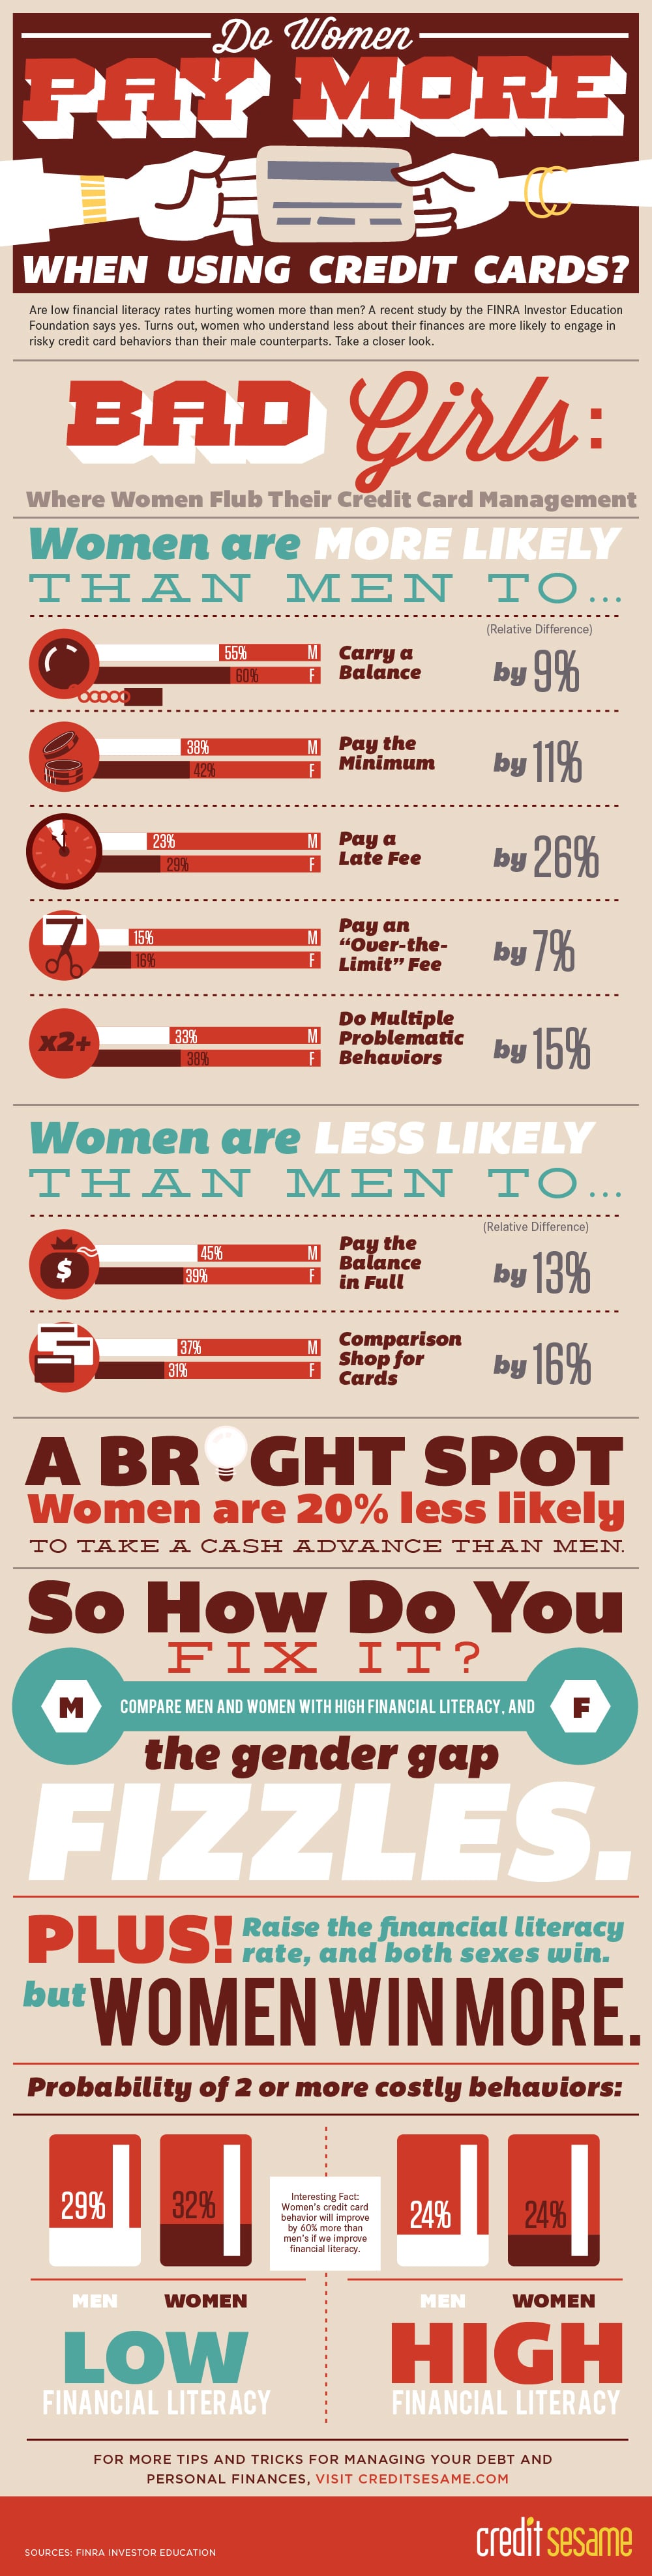 Gender Pricing: Women Often Pay More Than Men [Infographic]